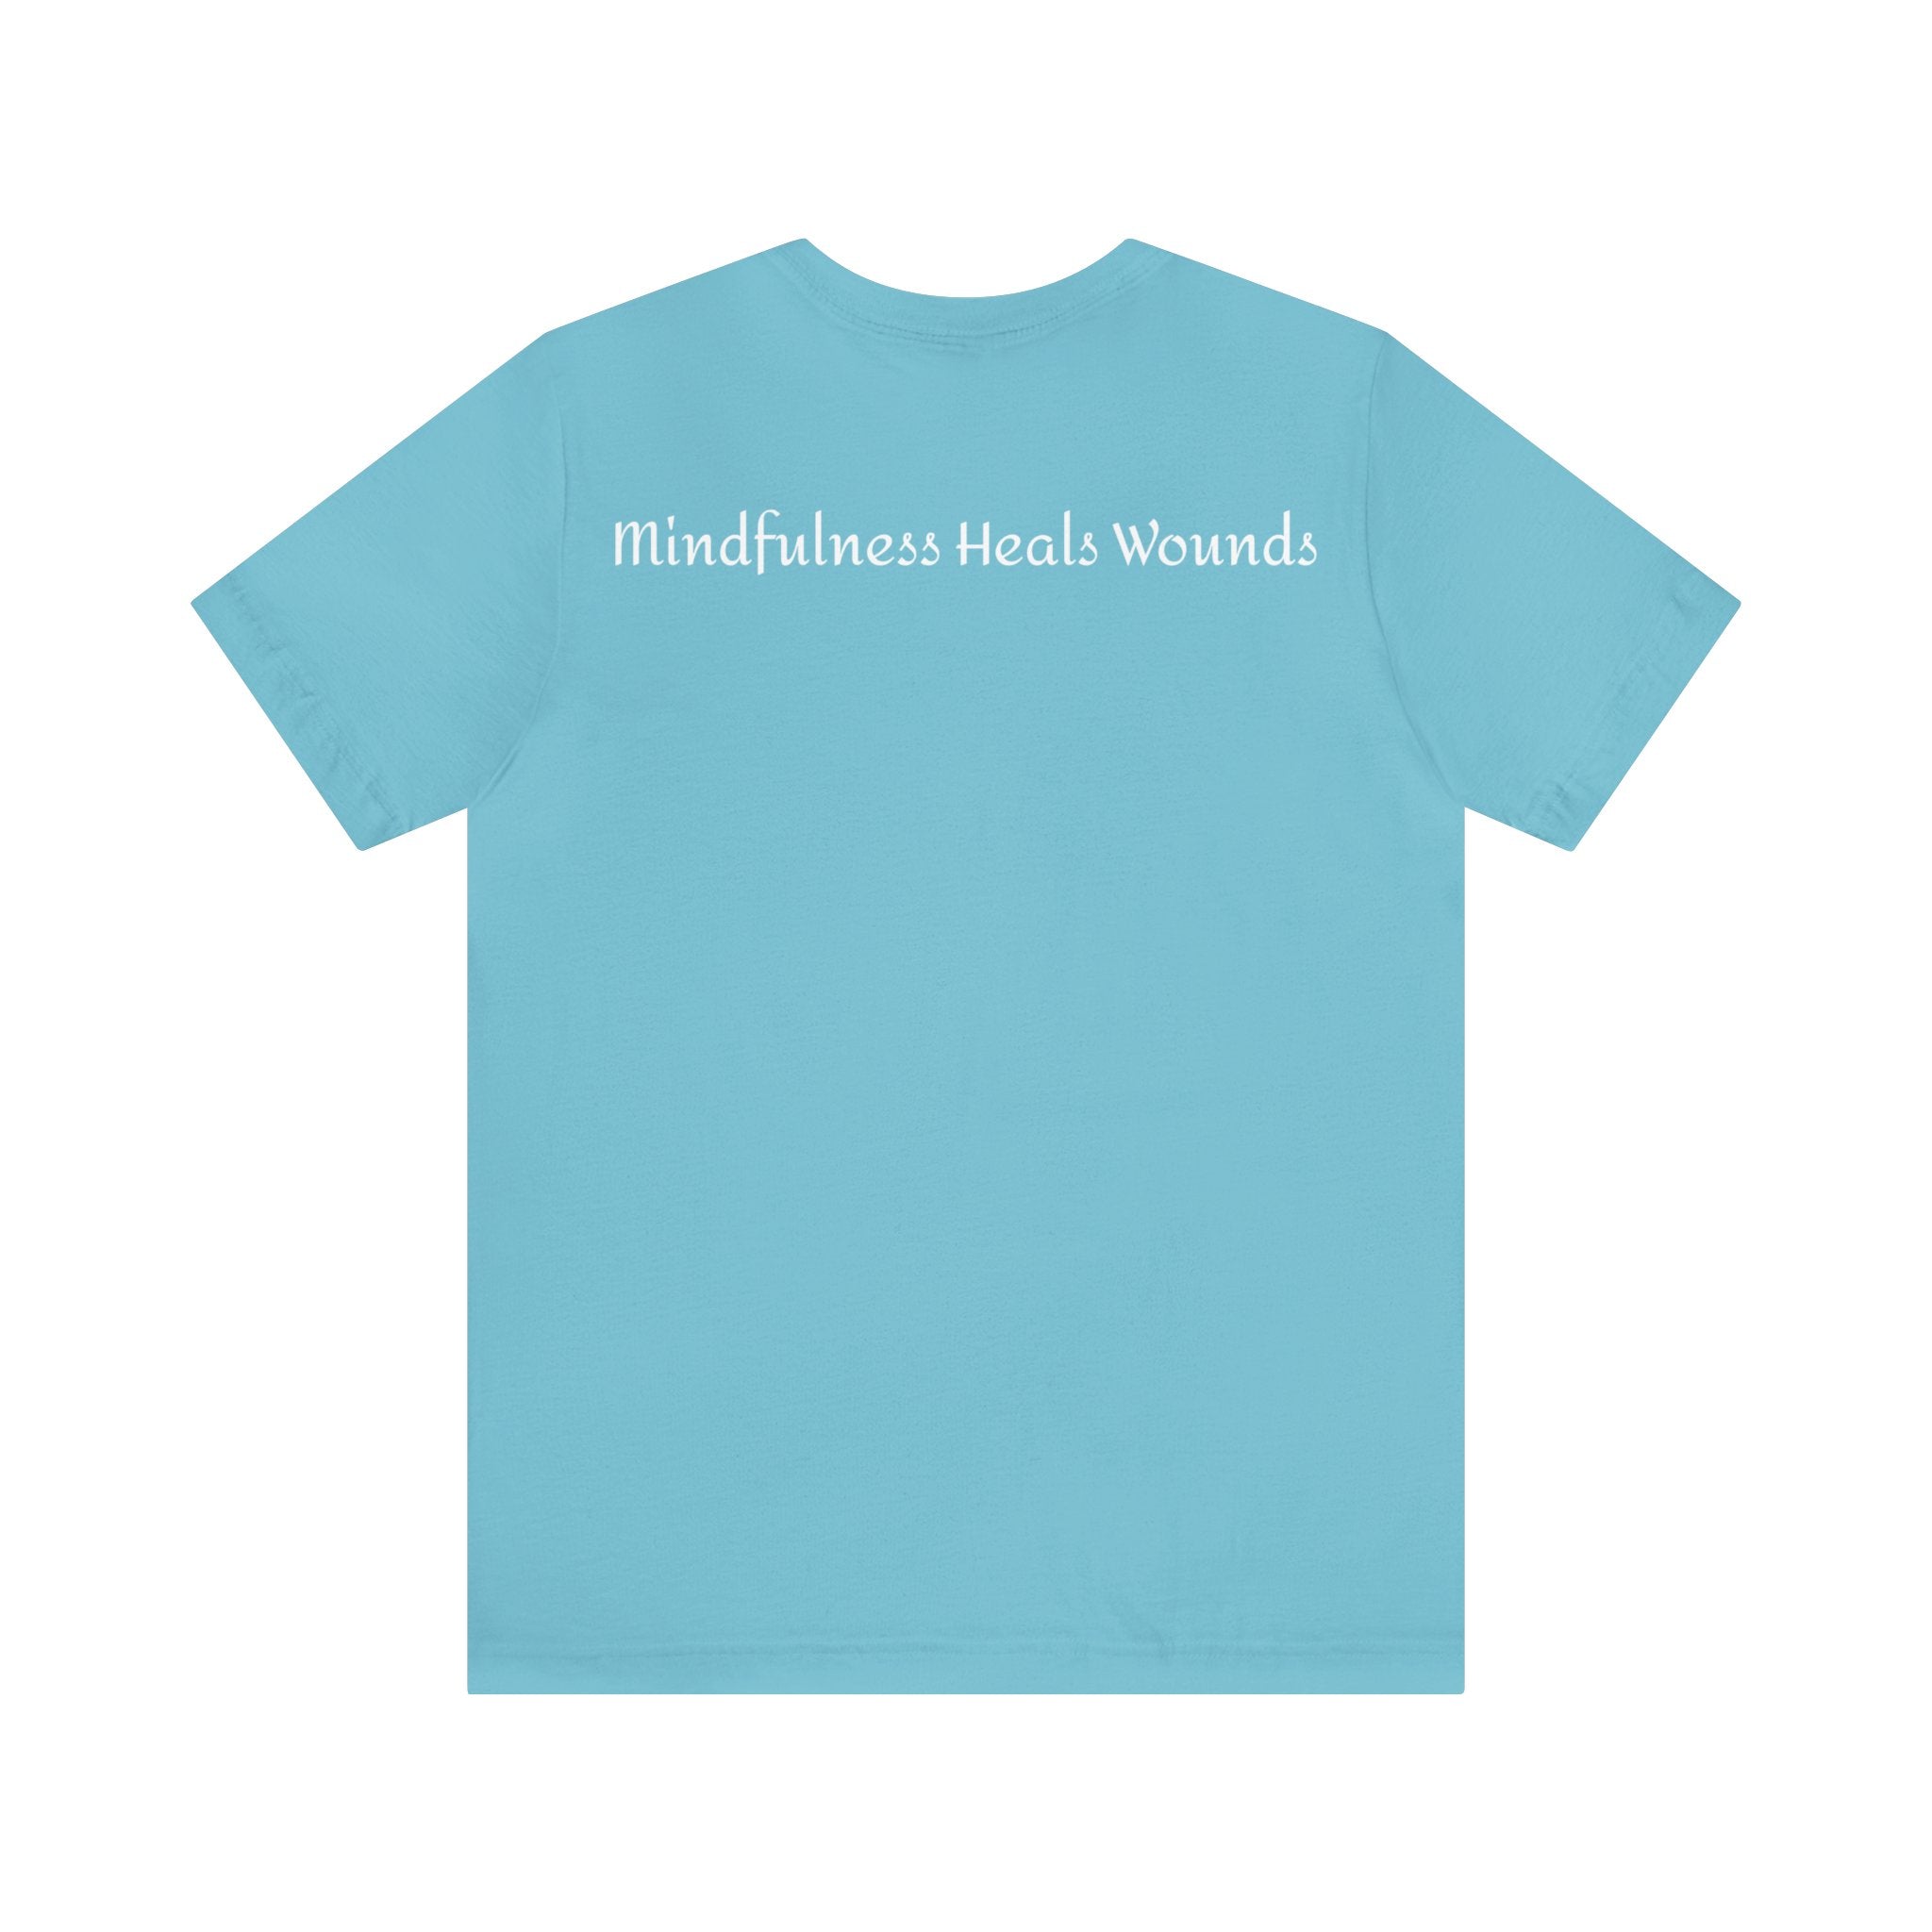 Mindfulness Heals Wounds Tee - Bella+Canvas 3001 Turquoise Airlume Cotton Bella+Canvas 3001 Crew Neckline Jersey Short Sleeve Lightweight Fabric Mental Health Support Retail Fit Tear-away Label Tee Unisex Tee T-Shirt 3555850646378615862_2048 Printify